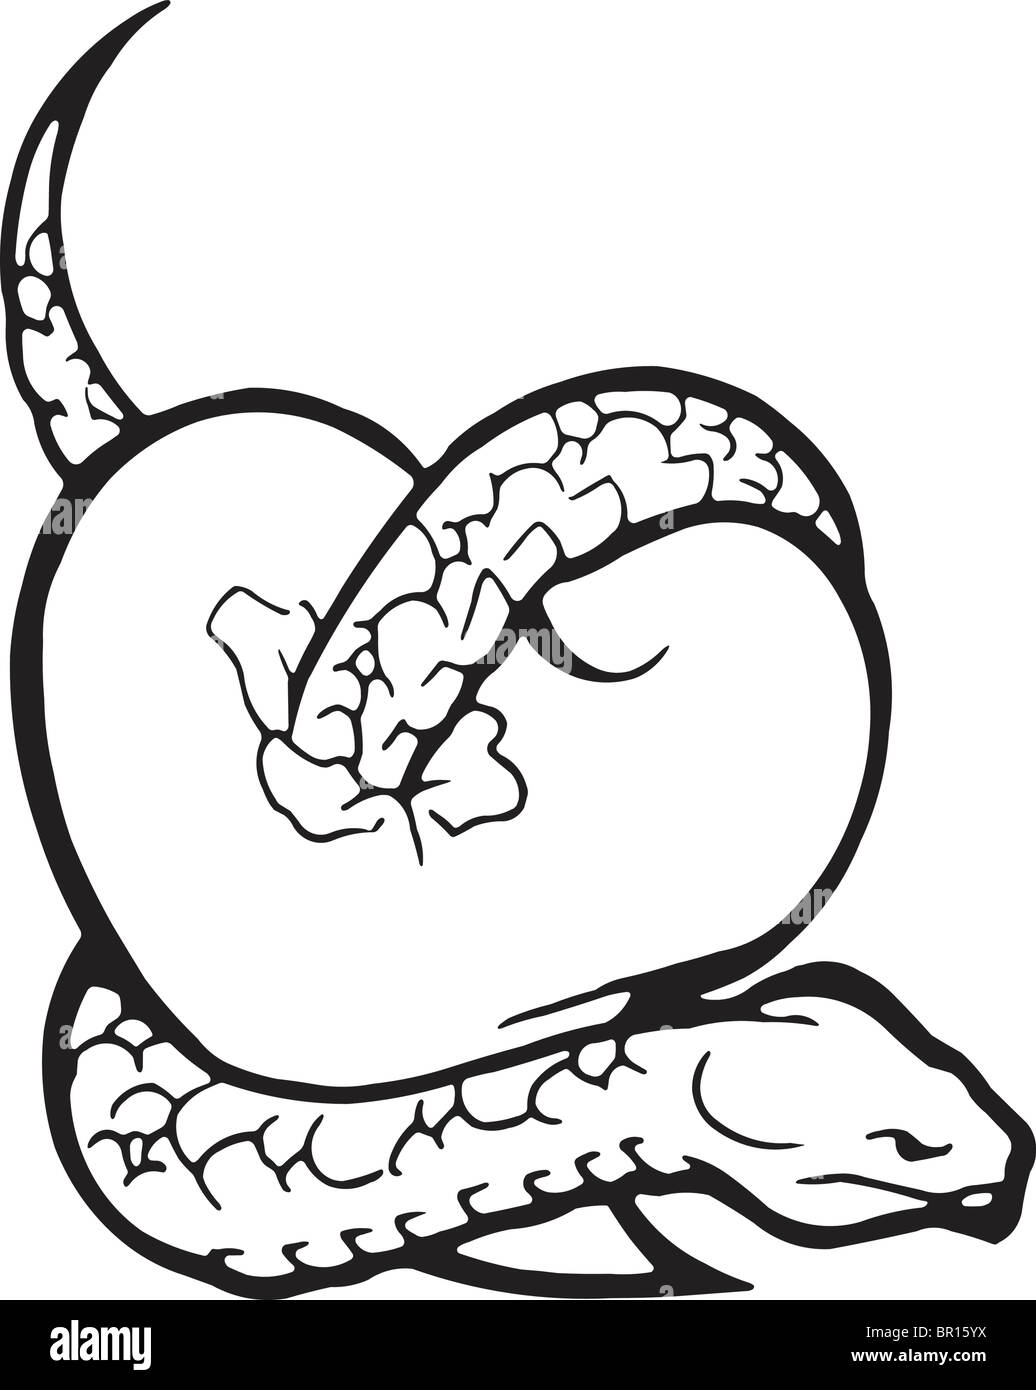 Serpent Black and White Stock Photos & Images - Alamy